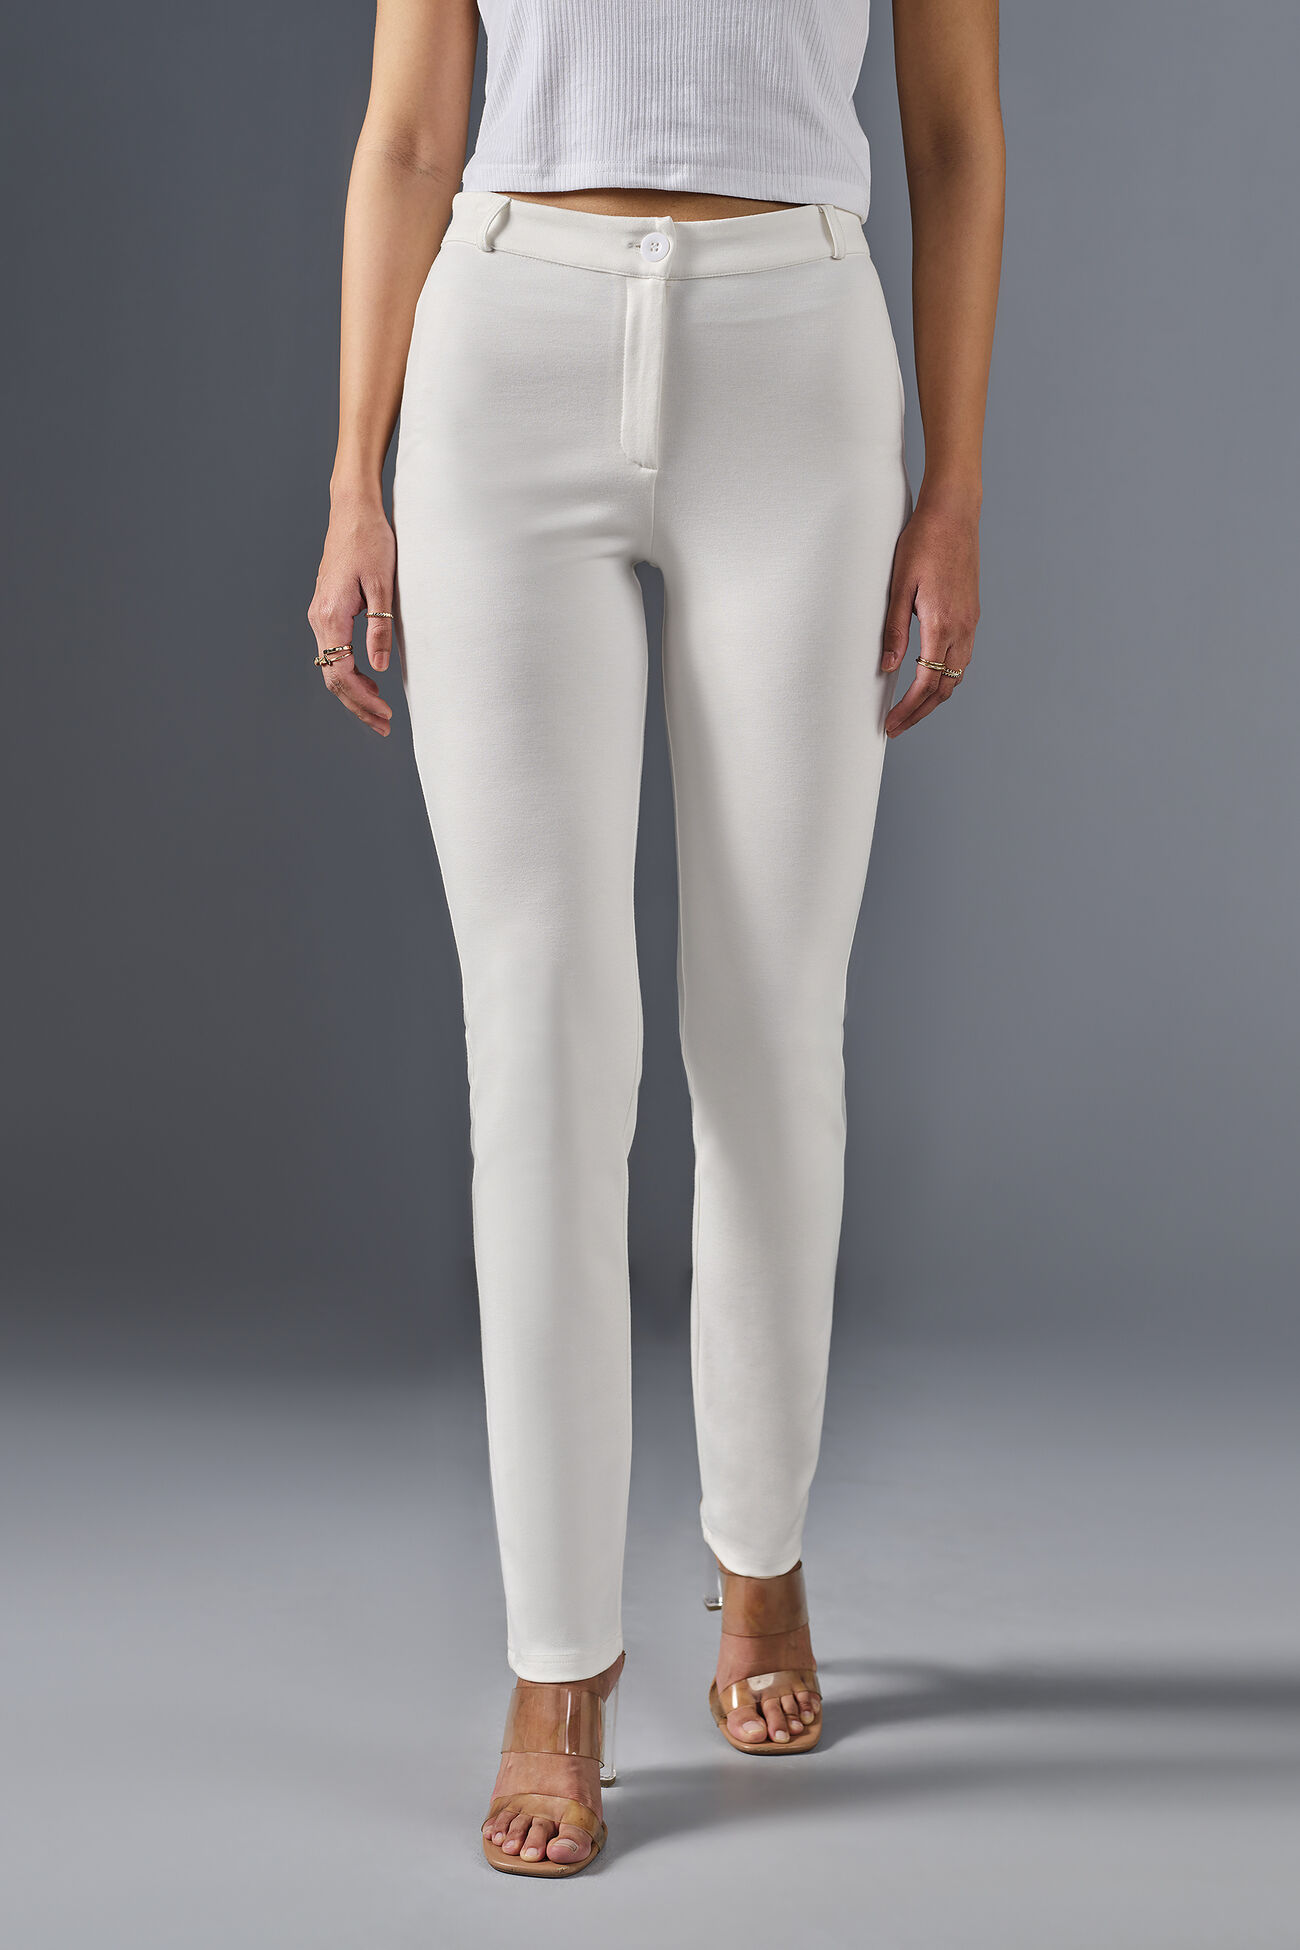 Stay Sleek Cigarette Trousers, White, image 2